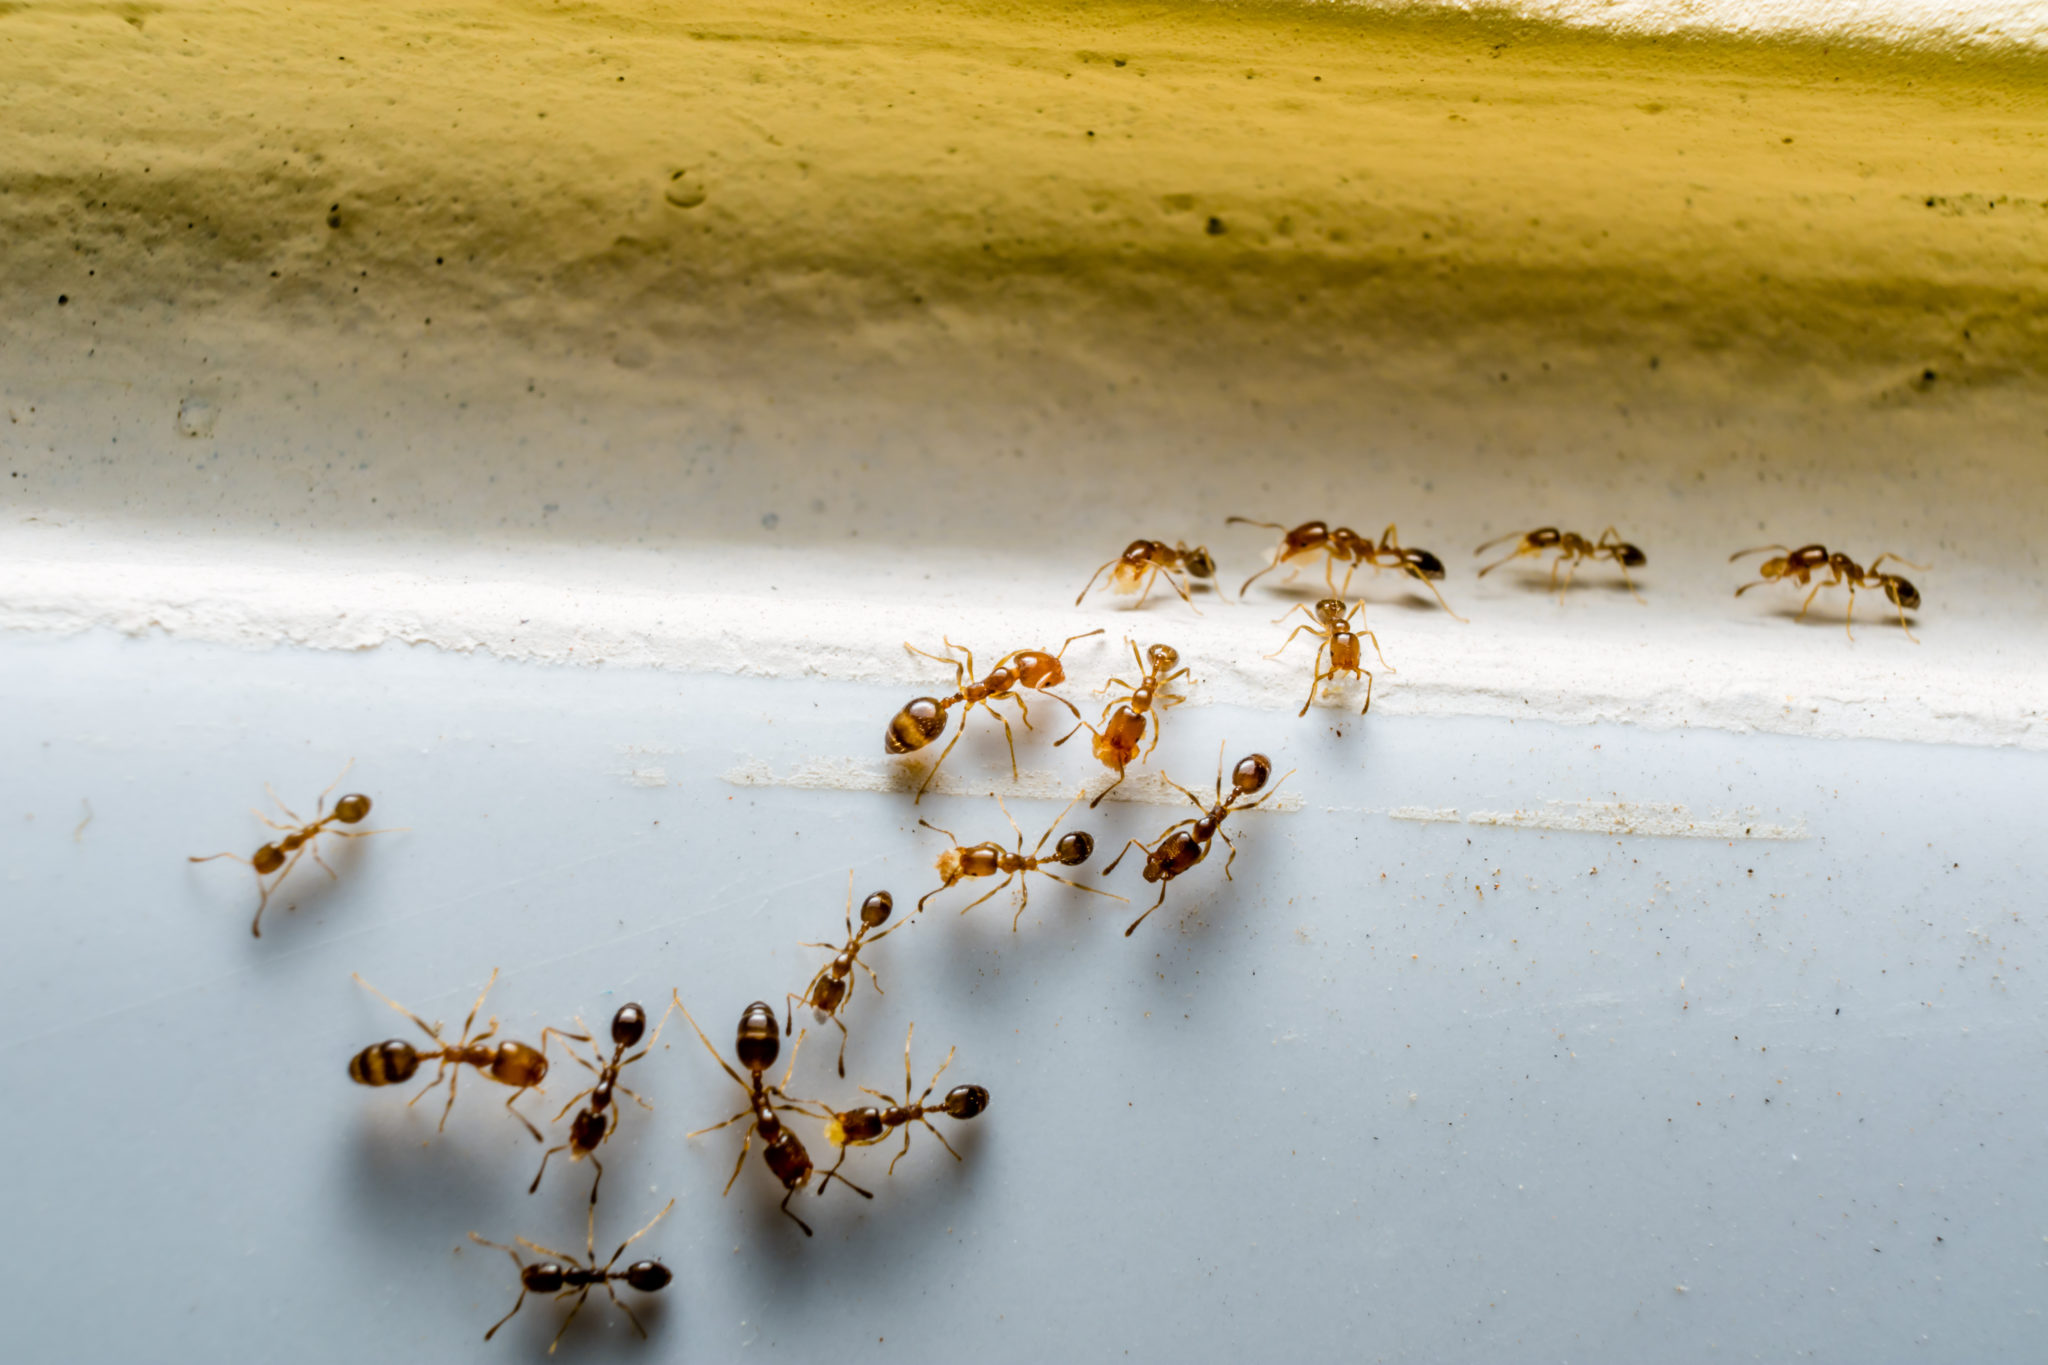 Ants infestation in Canberra home